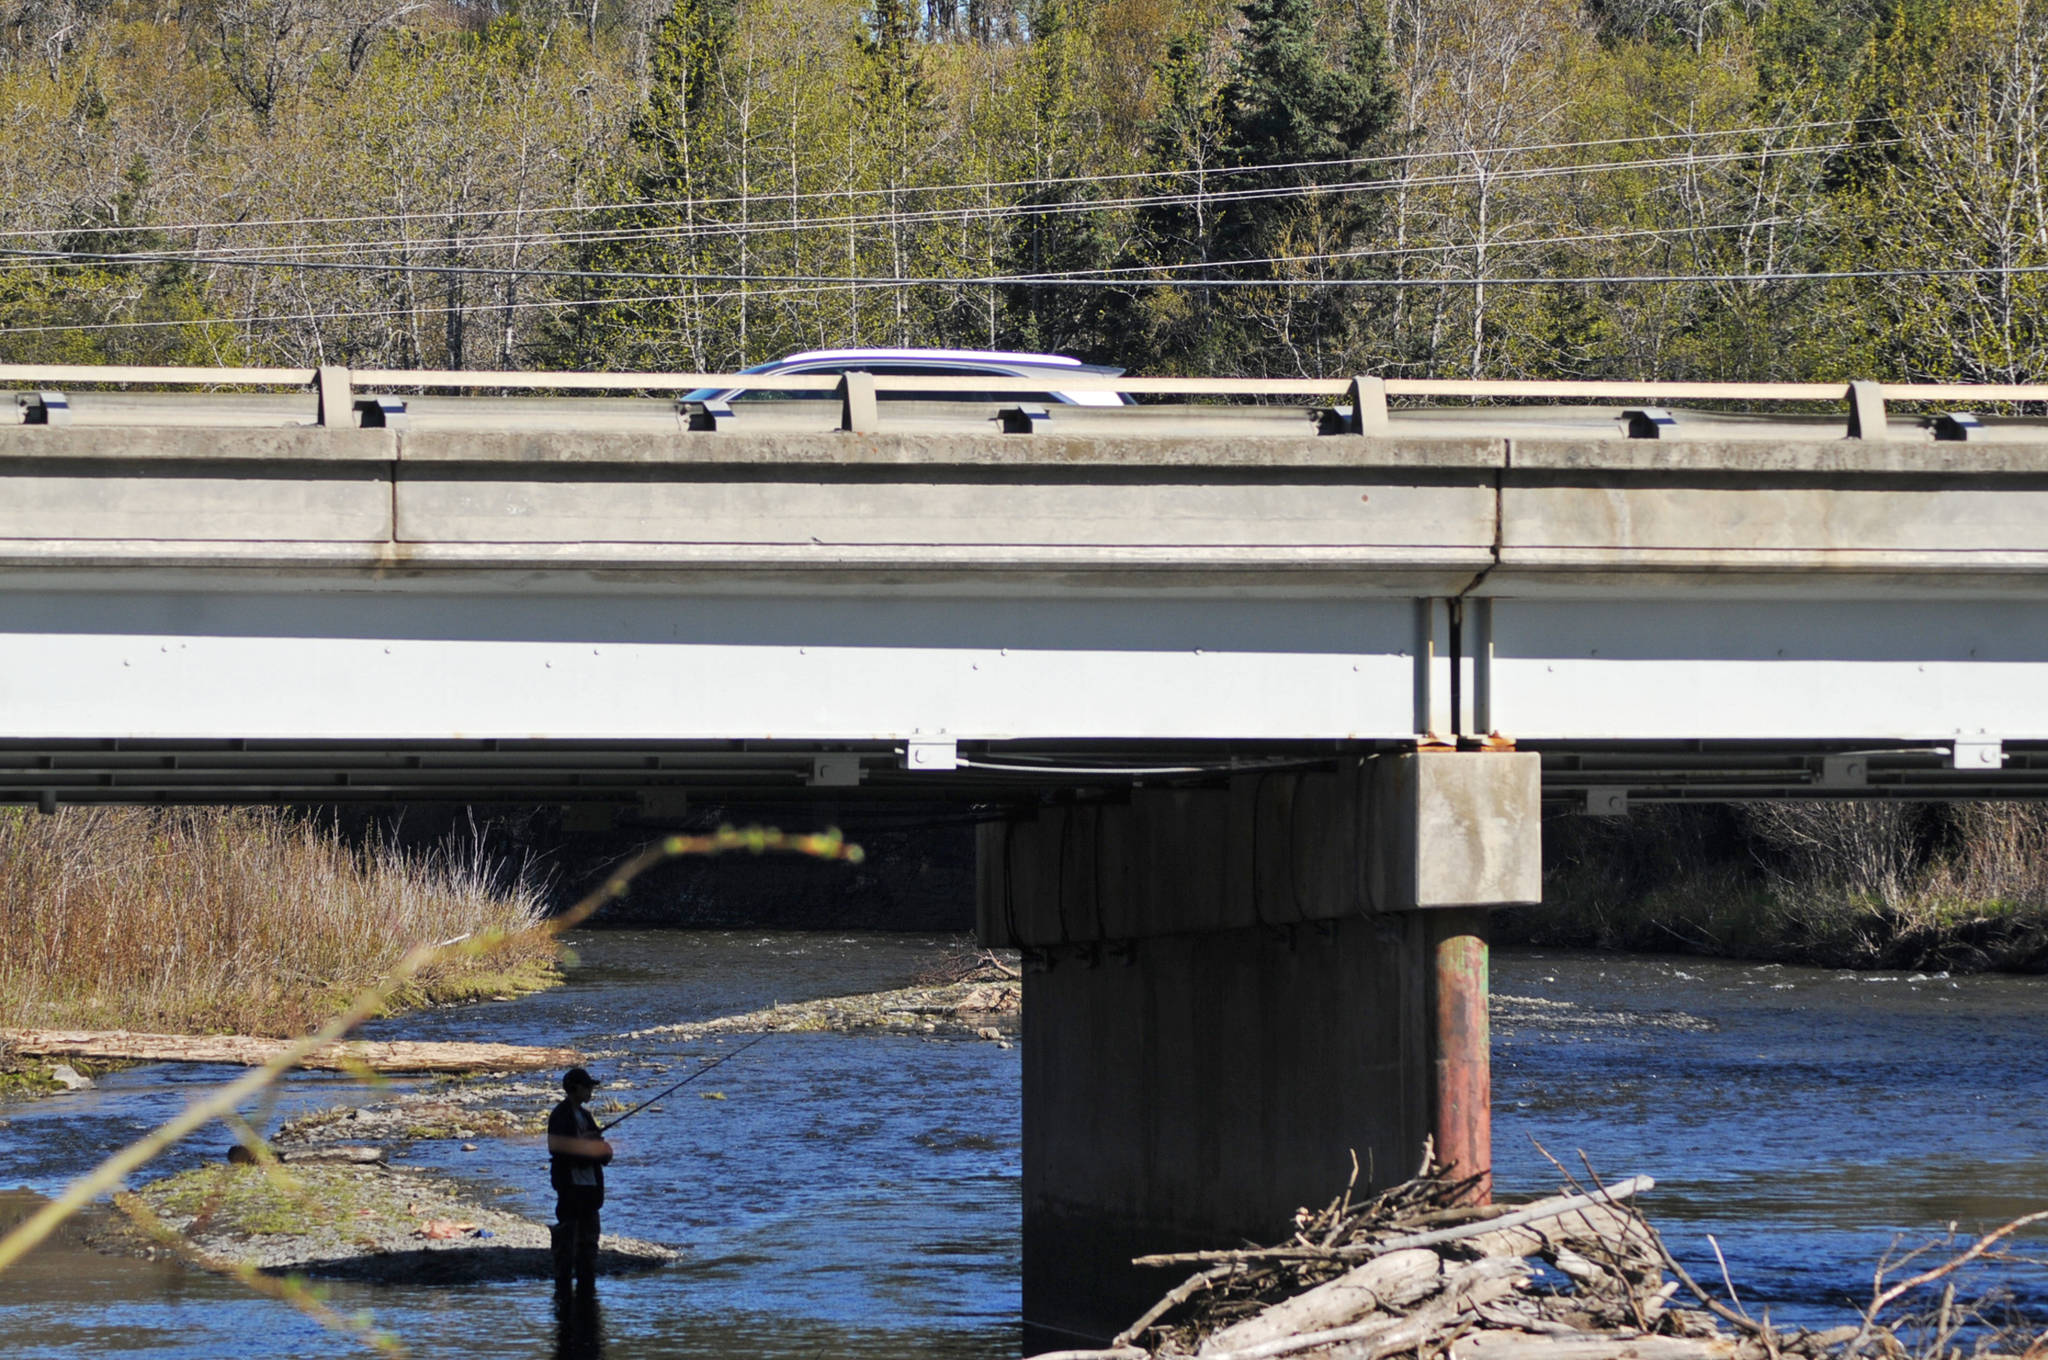 A car passes over the Deep Creek bridge as an angler tosses a line in the water on Sunday, May 28, 2018 in Ninilchik, Alaska. Despite the perfect weather and holiday weekend, few anglers dotted the banks of the Ninlichik River and Deep Creek on Sunday, in part because the number of salmon in the rivers so far is still fairly paltry. The Alaska Department of Fish and Game classified the fishing over Memorial Day weekend as poor, in part because the water temperatures are still chilly for this time of year. (Photo by Elizabeth Earl/Peninsula Clarion)